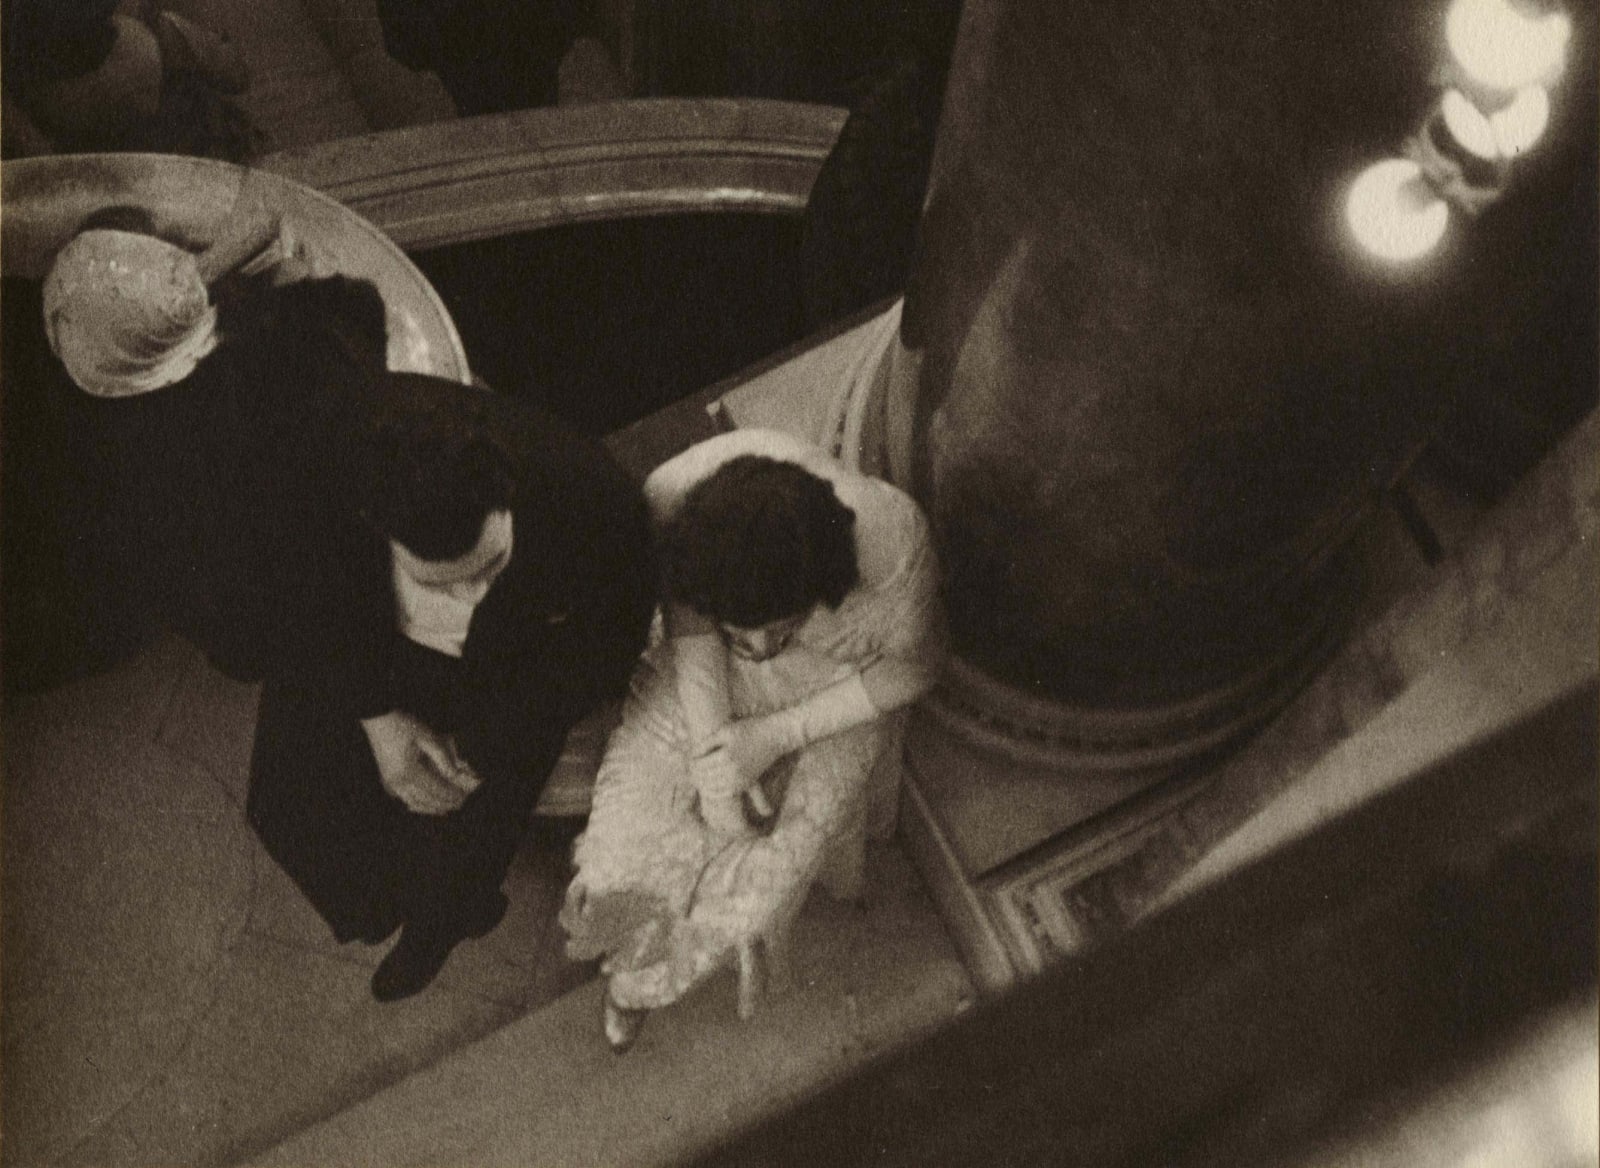 Ilse Bing photograph looking down on man and woman in black tie sitting down